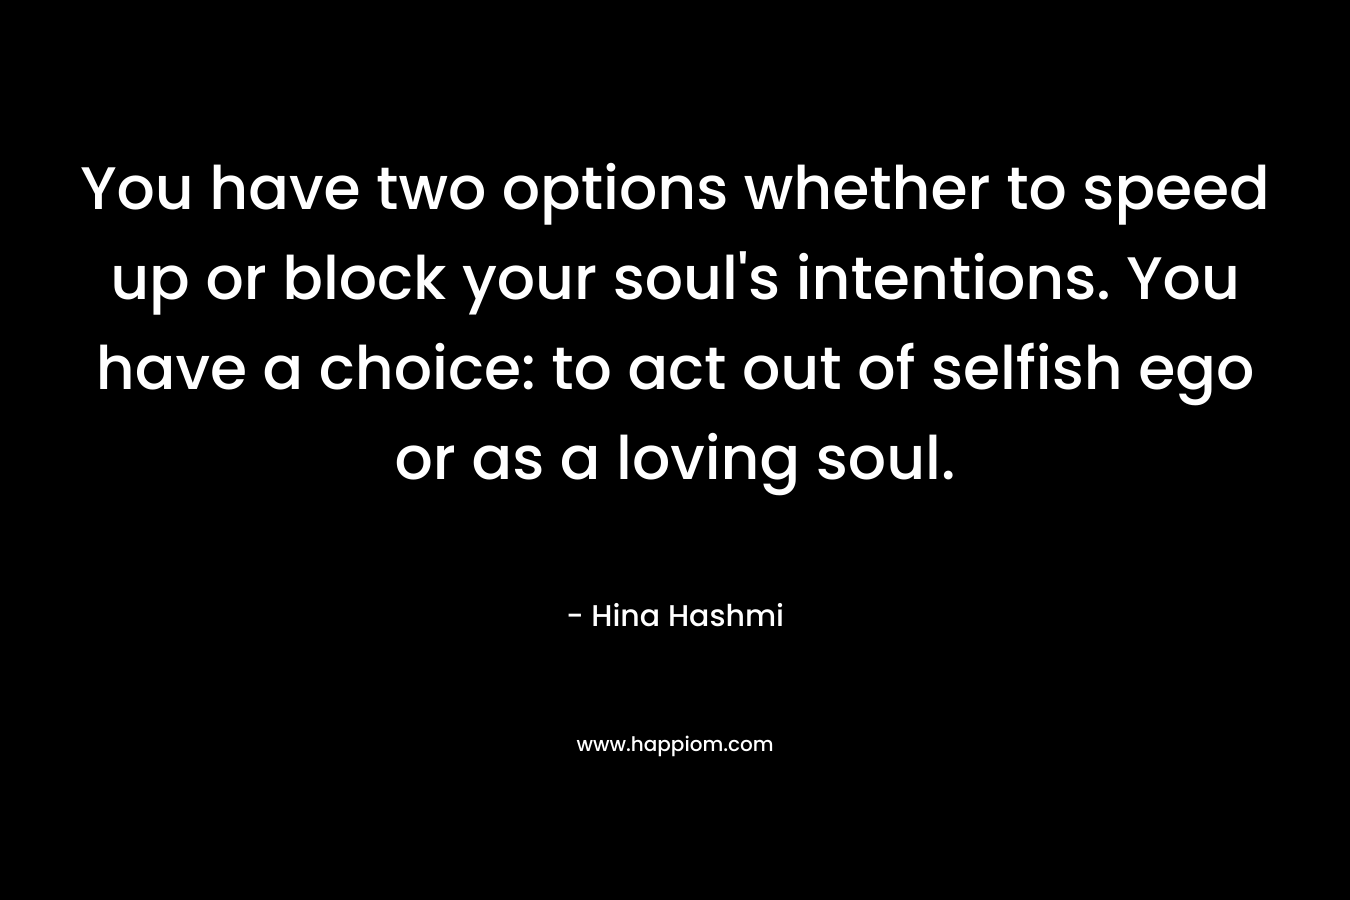 You have two options whether to speed up or block your soul's intentions. You have a choice: to act out of selfish ego or as a loving soul.